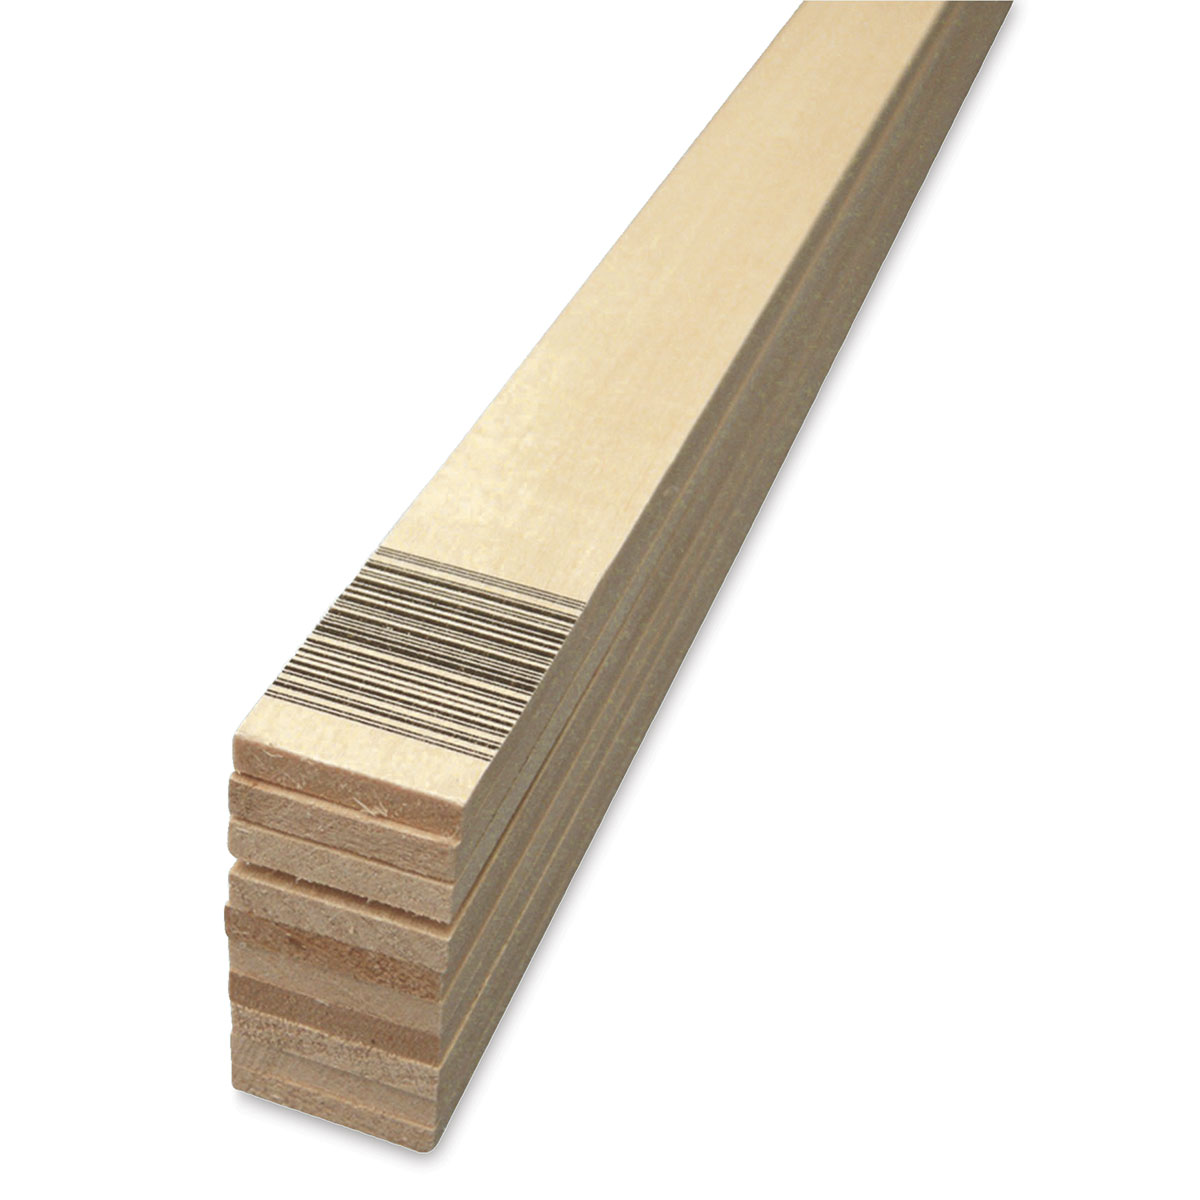 3/4 Thick, 24 Length Basswood Planks